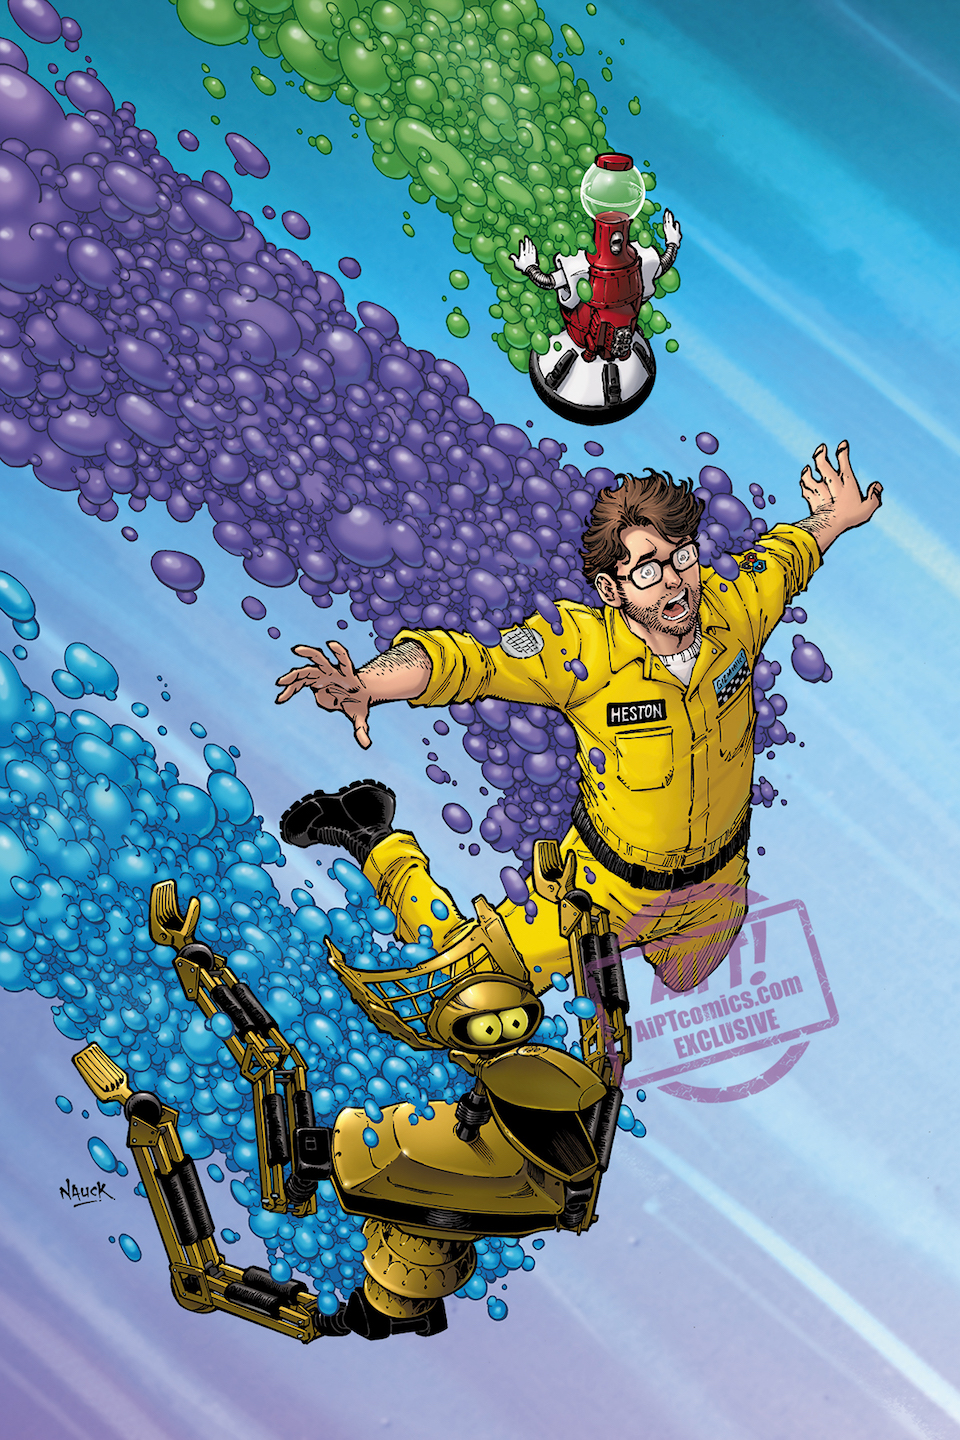 [EXCLUSIVE] Dark Horse Comics Mystery Science Theater 3000 #2 solicitation